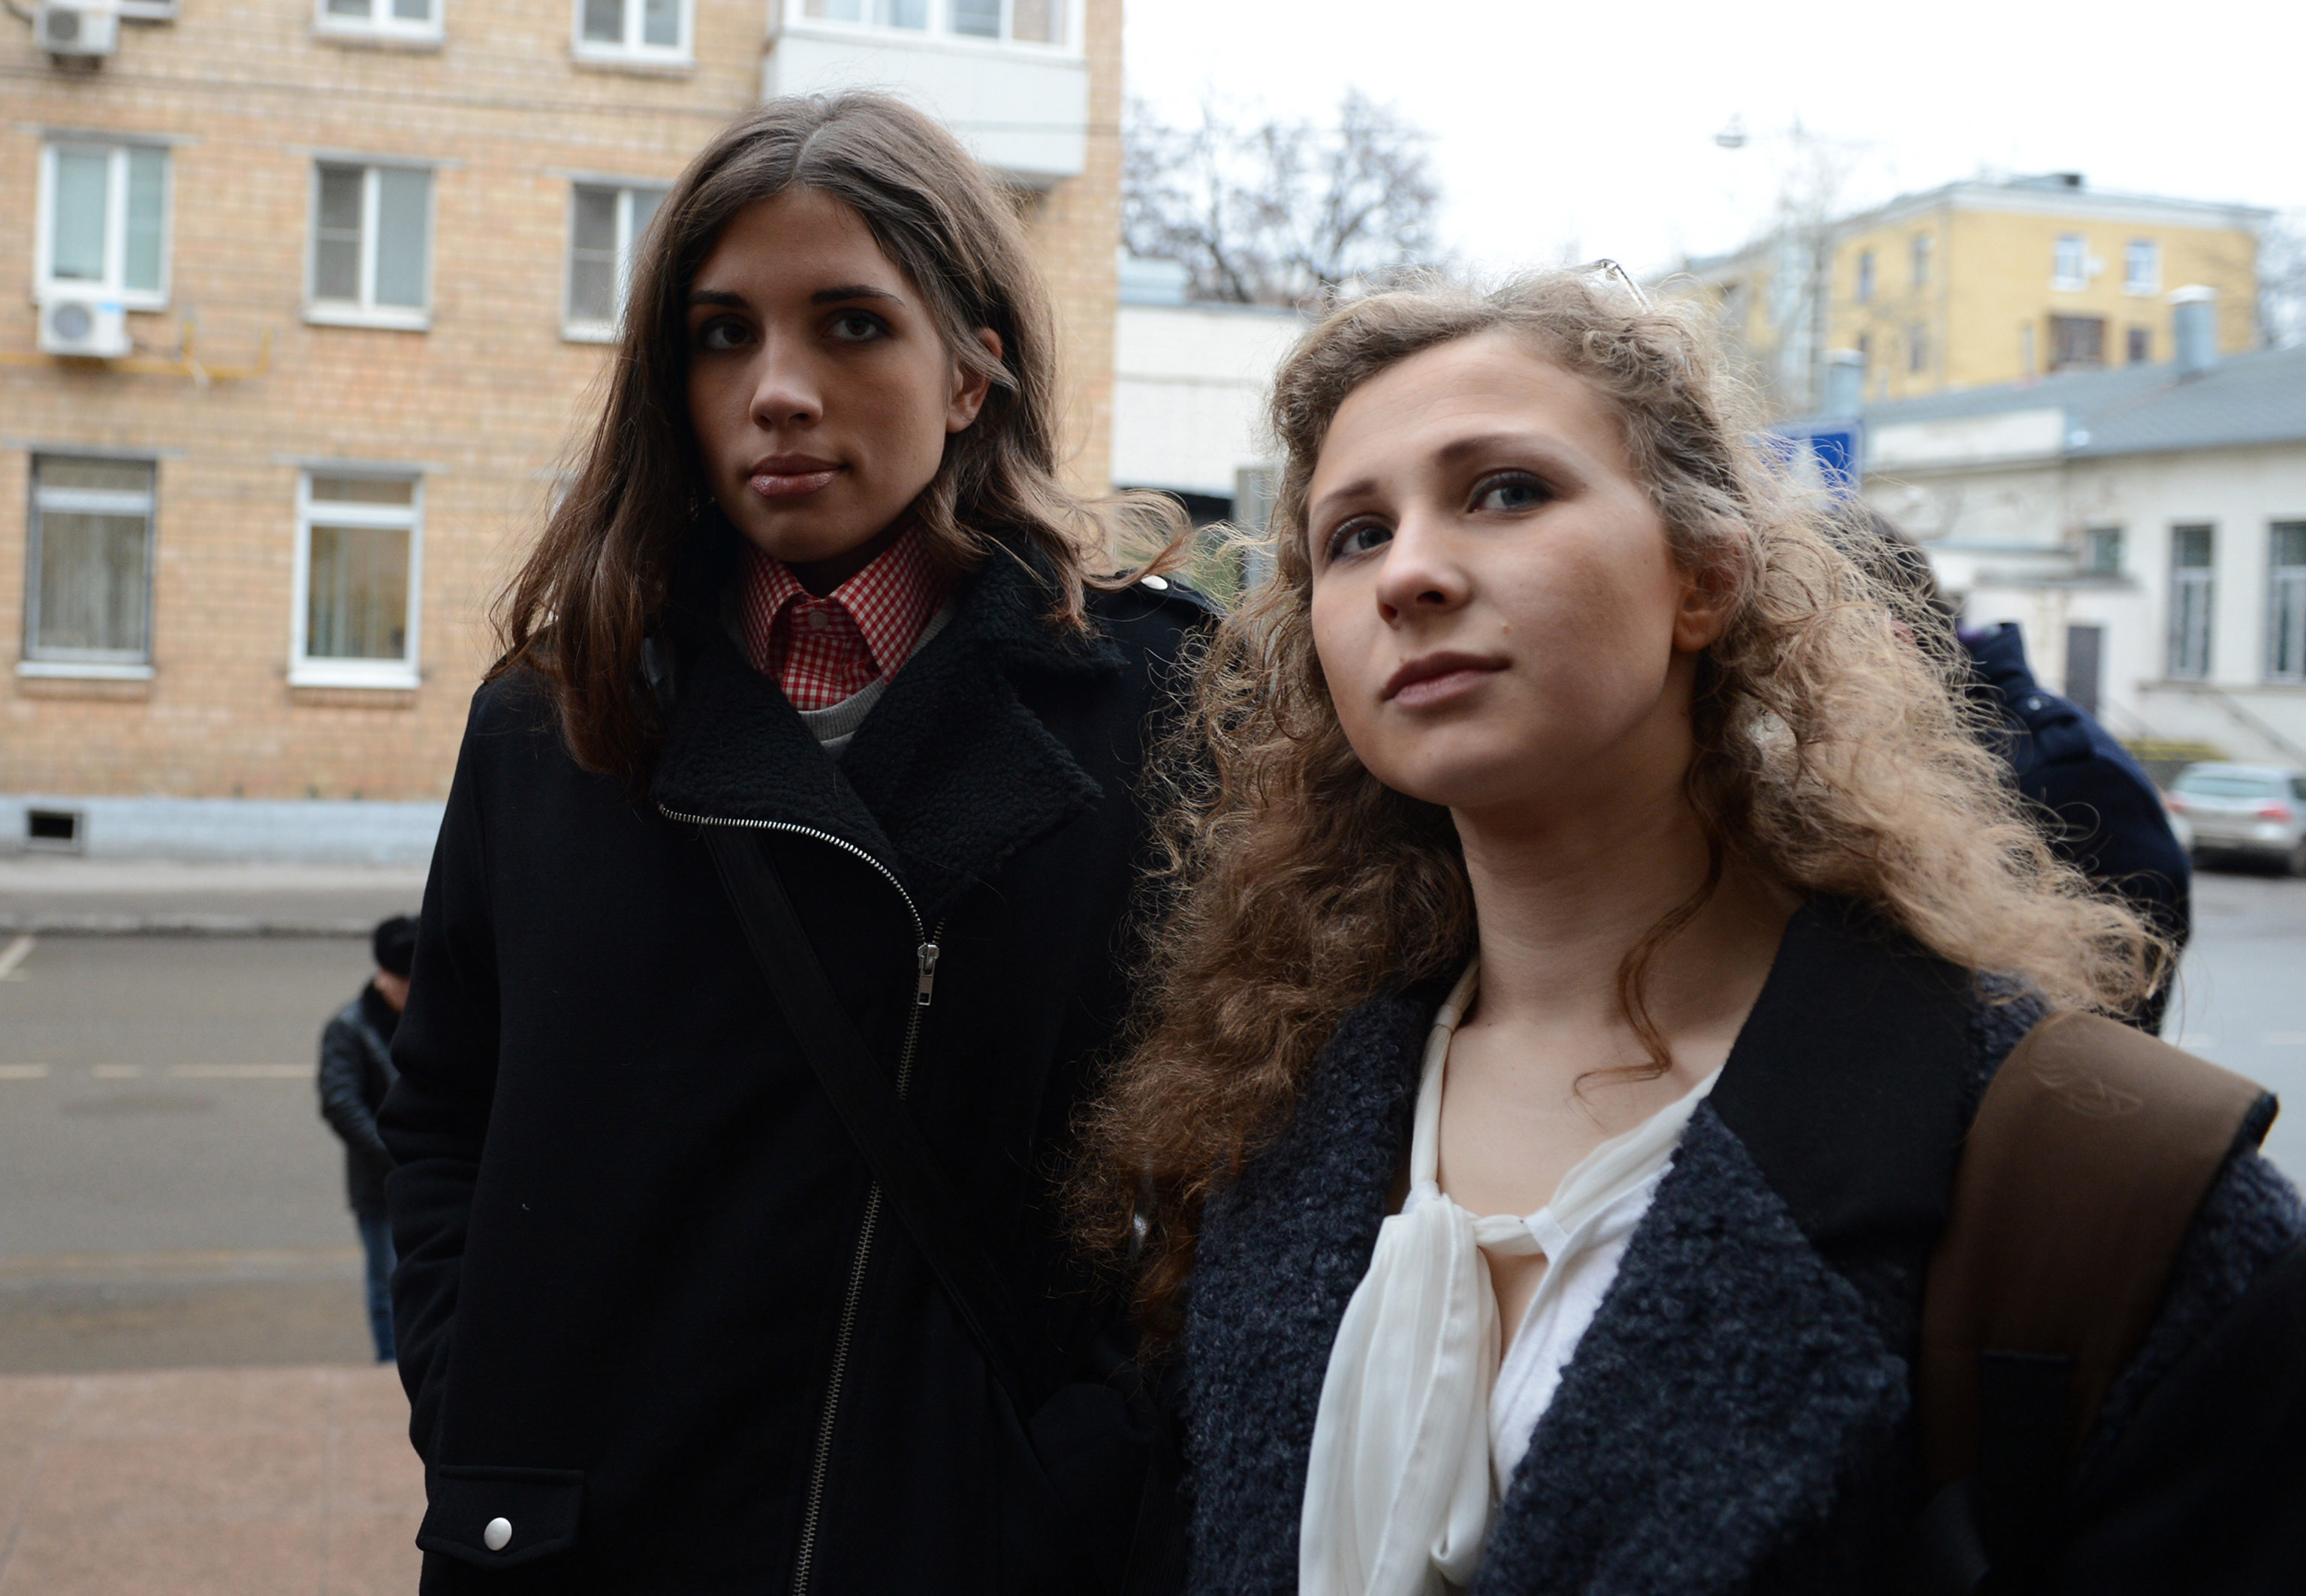 Maria Alyokhina (R) and  Nadezhda Tolokonnikova (L), members of Pussy Riot music club come to the court on January 9 to attend the "Bolotnaya trial" took action after an indignation meeting against Vlaidmir Putin at Bolotnaya Spuare in 2012, Moscow, Russia (Sefa Karacan / Anadolu Agency / Getty Images)